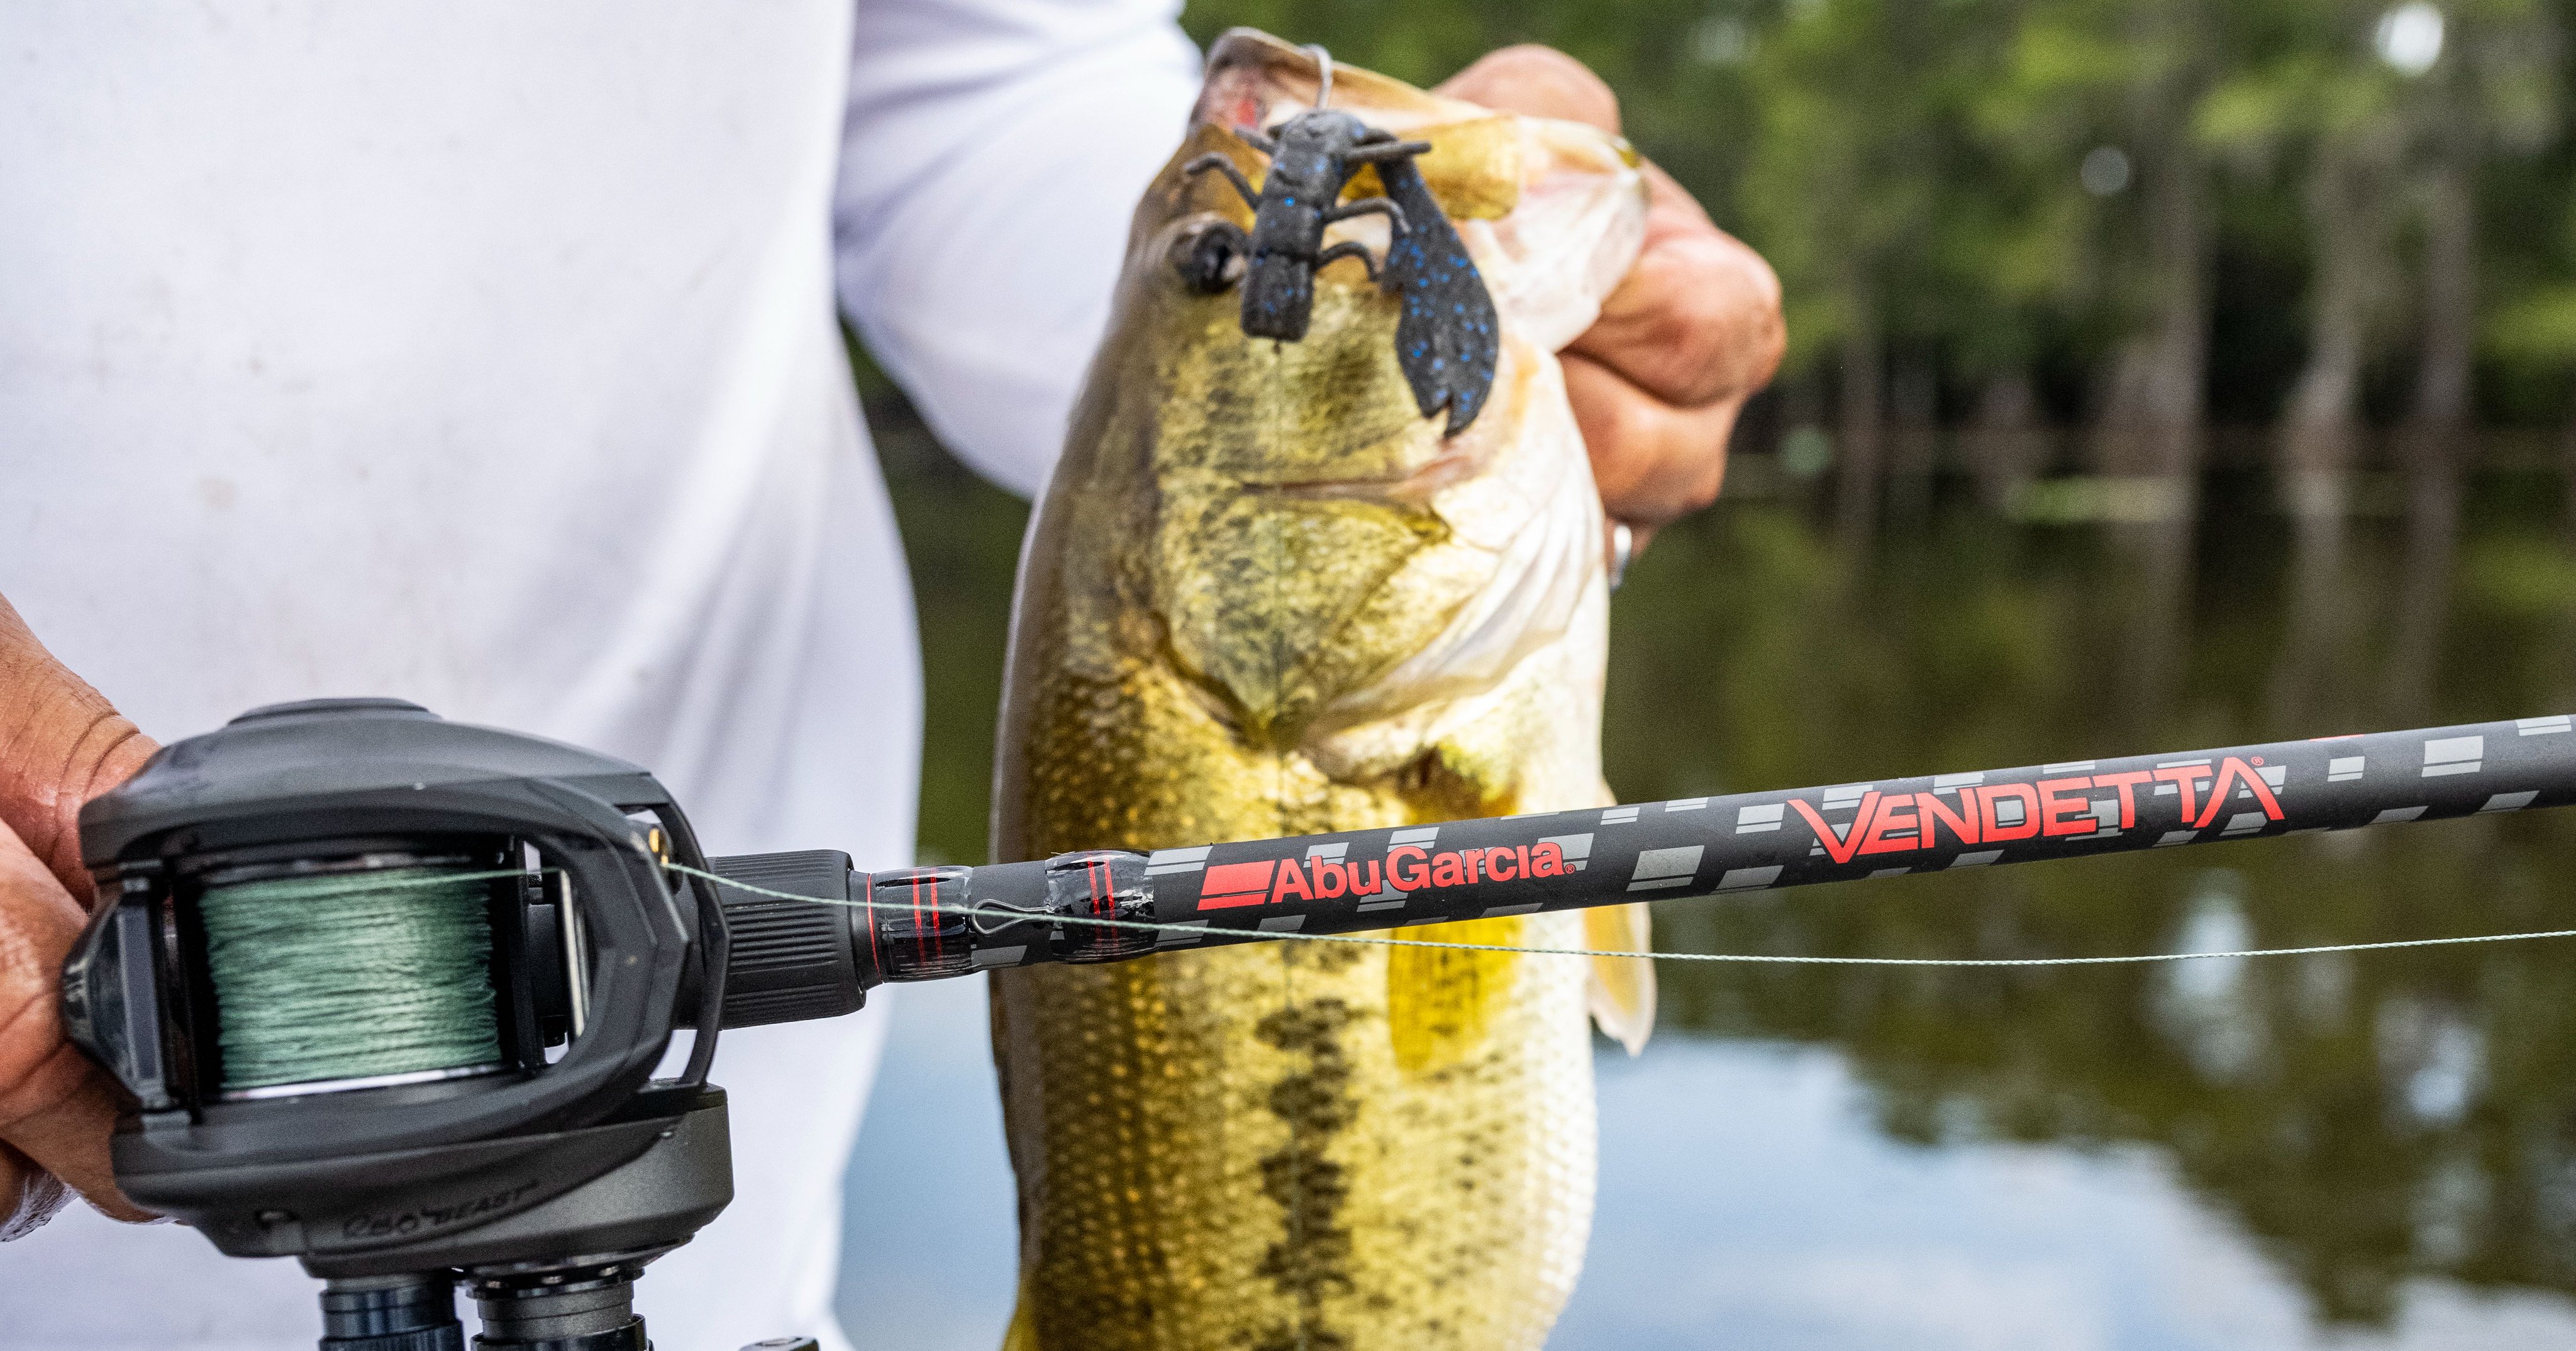 Abu Garcia on X: Introduced at Icast 2021, this new series offers